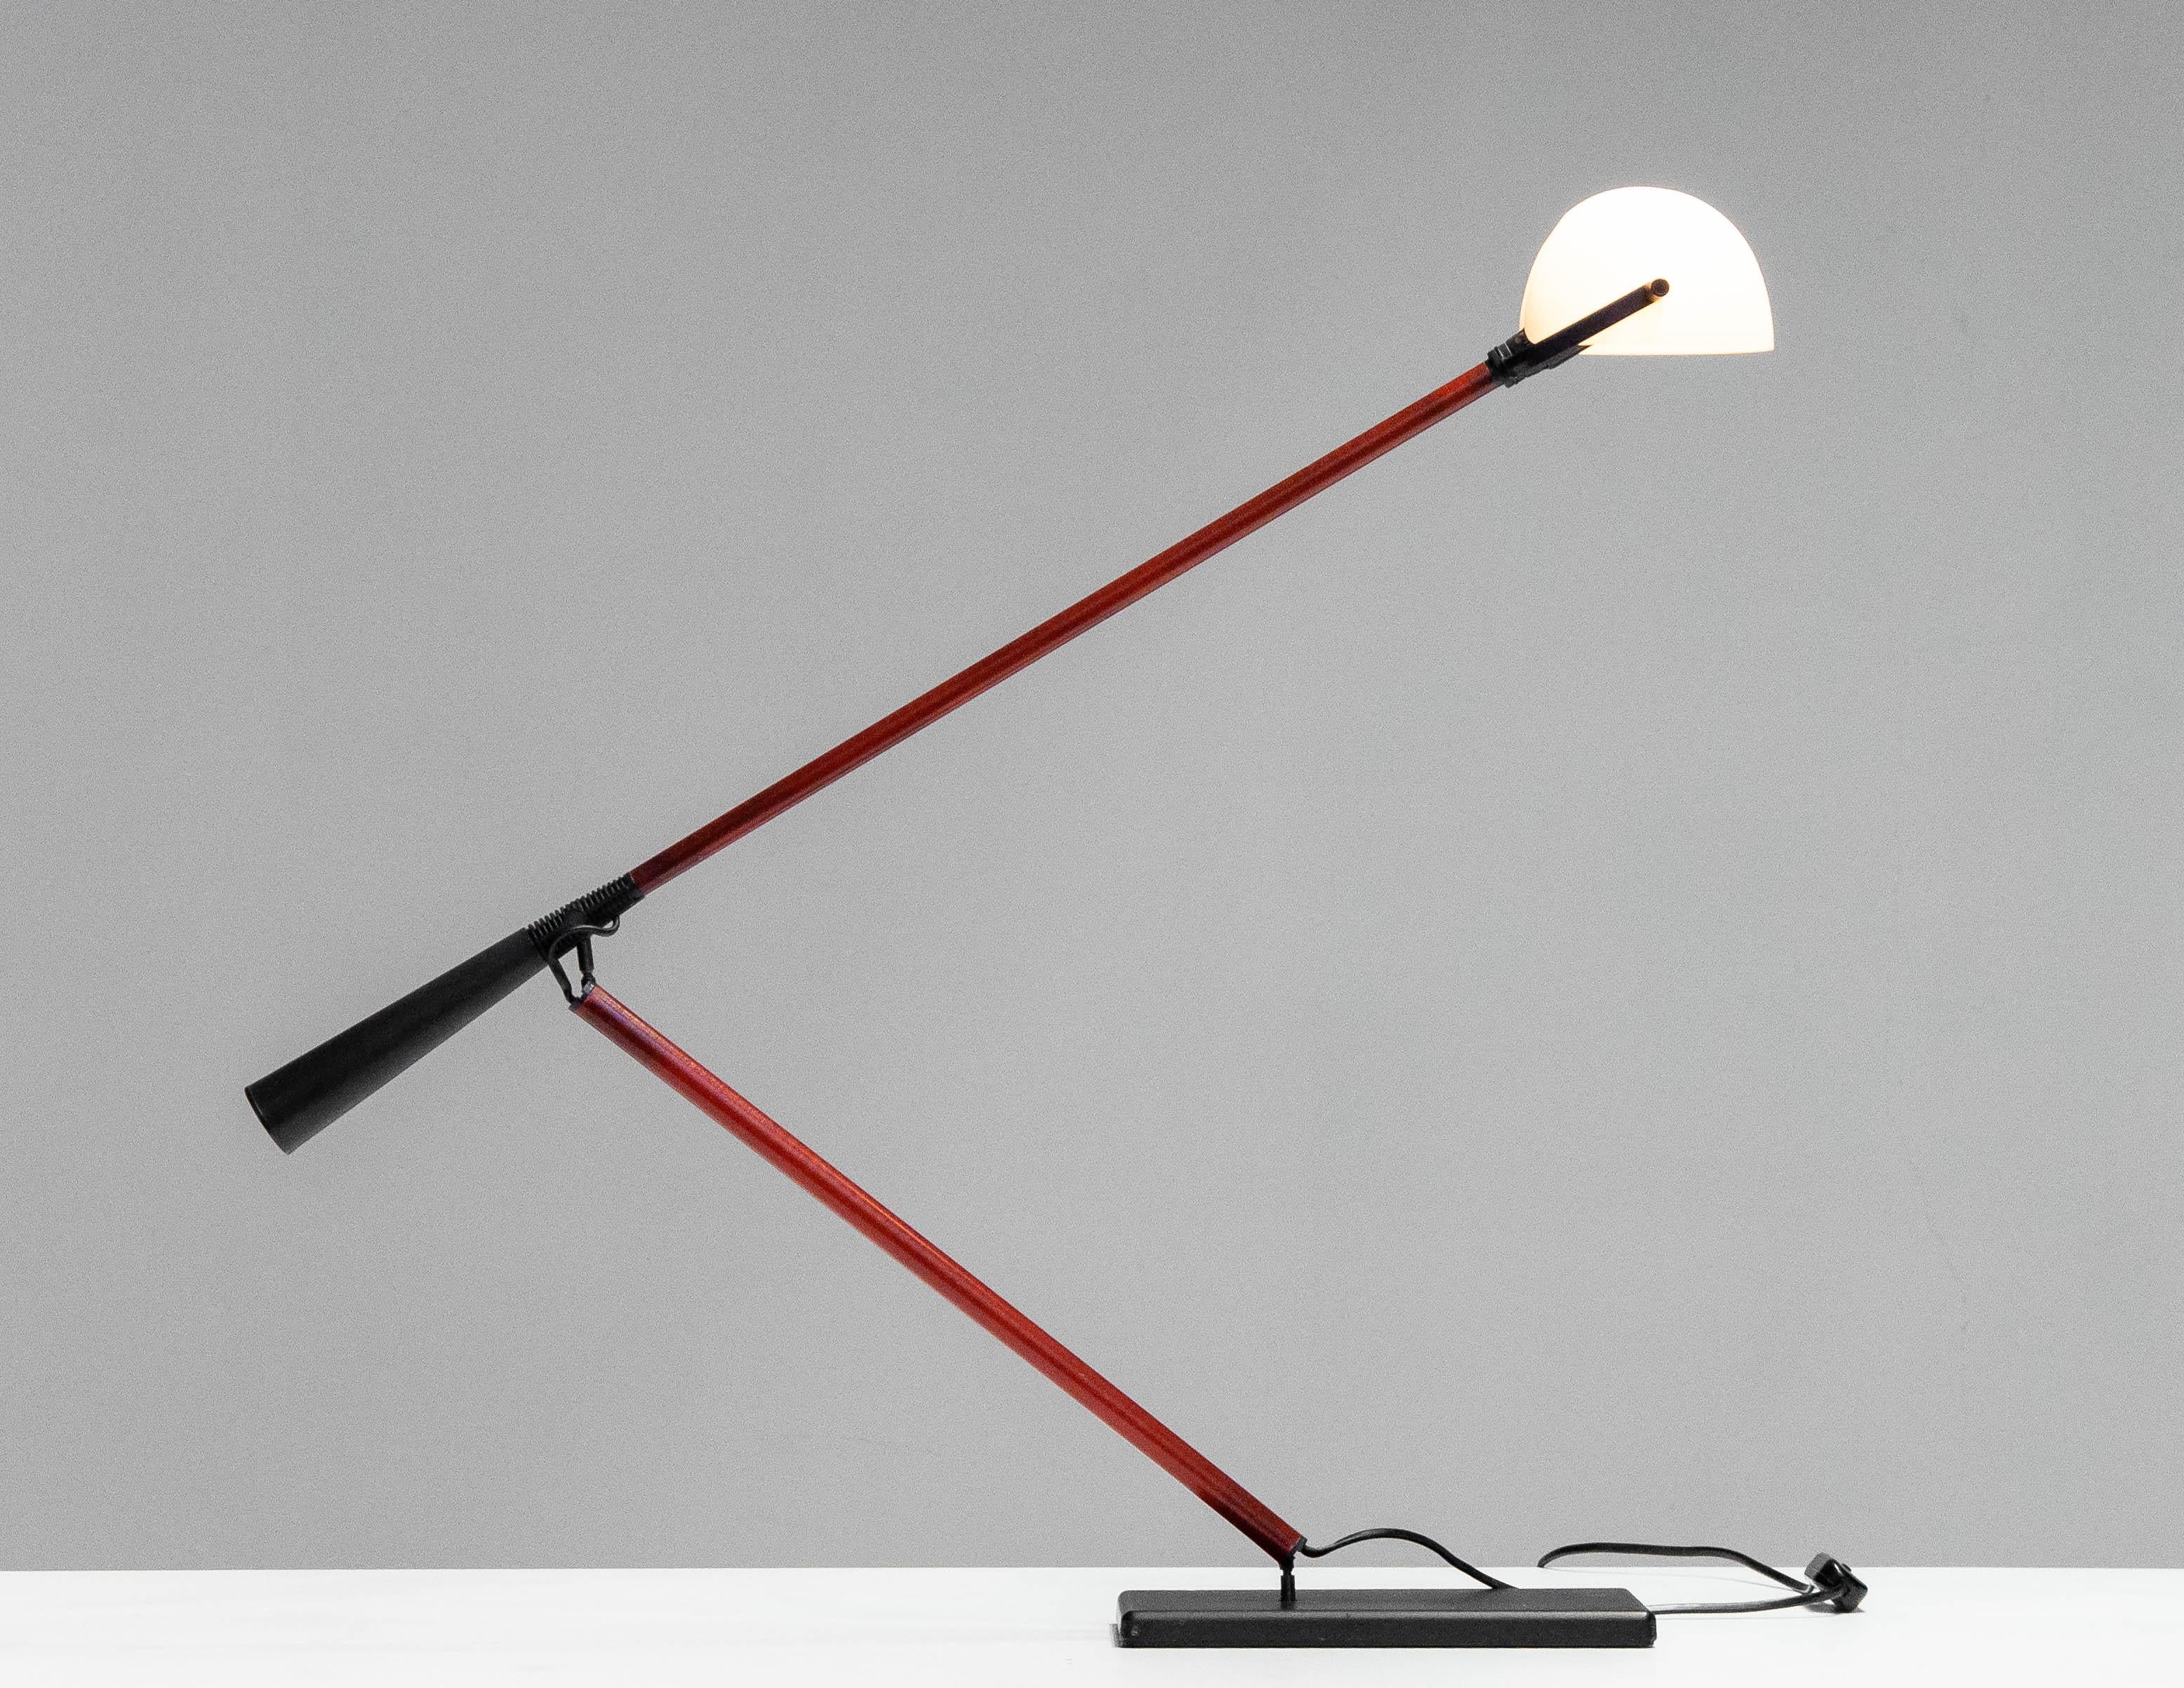 Italian desk lamp / table lamp Model: 613 designed by Paolo Rizzatto for Arteluce in the '70s. The table lamp has a rectangular metal base with a mounted twisting arm made of fiberglass. Fiberglass arm with counterweight 
Inside the adjustable